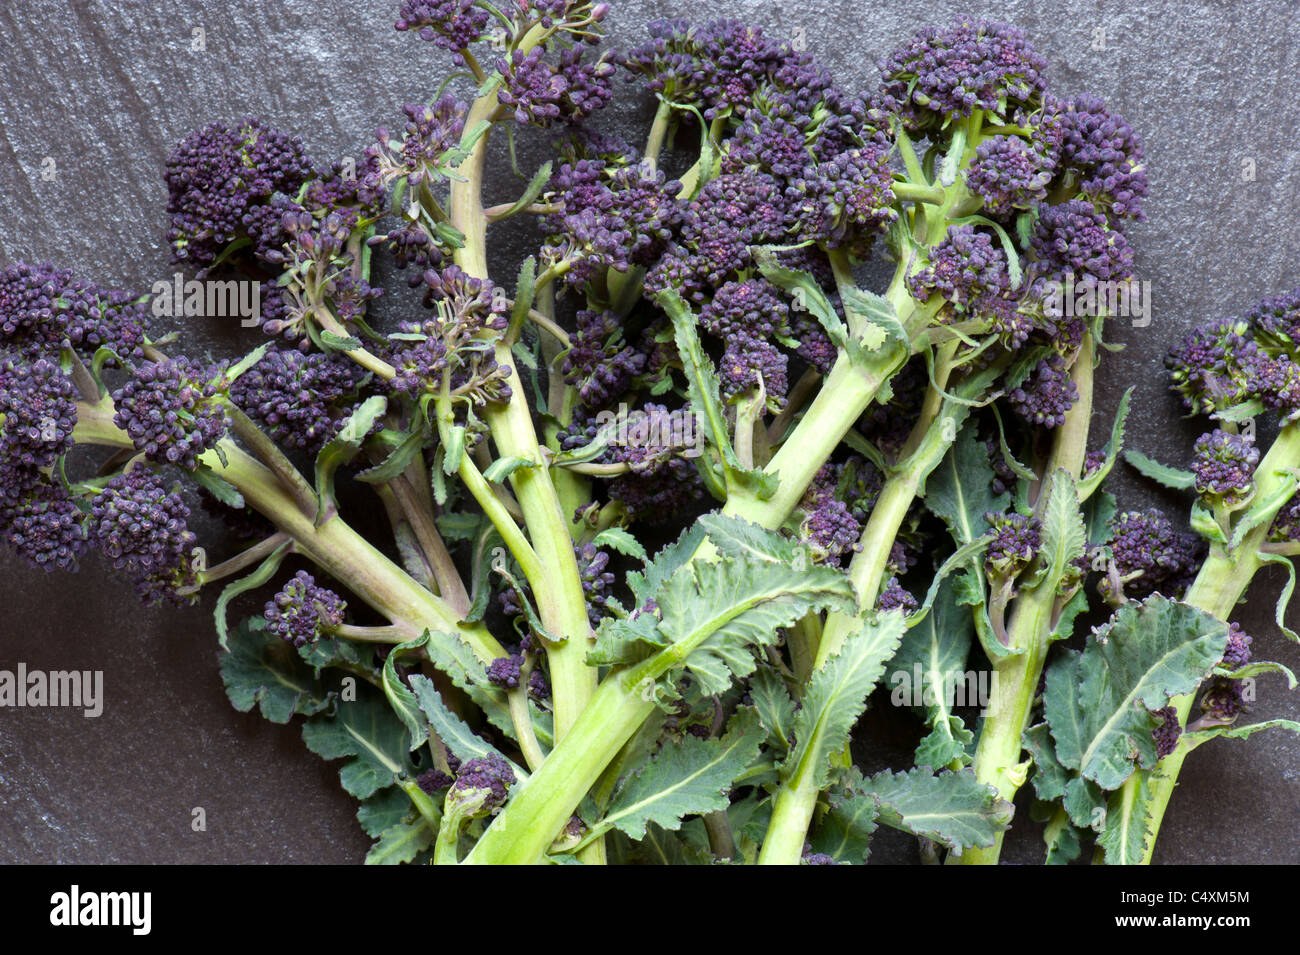 Freshly Picked Purple Sprouting Broccoli, Laid On A Slate Work Surface Stock Photo